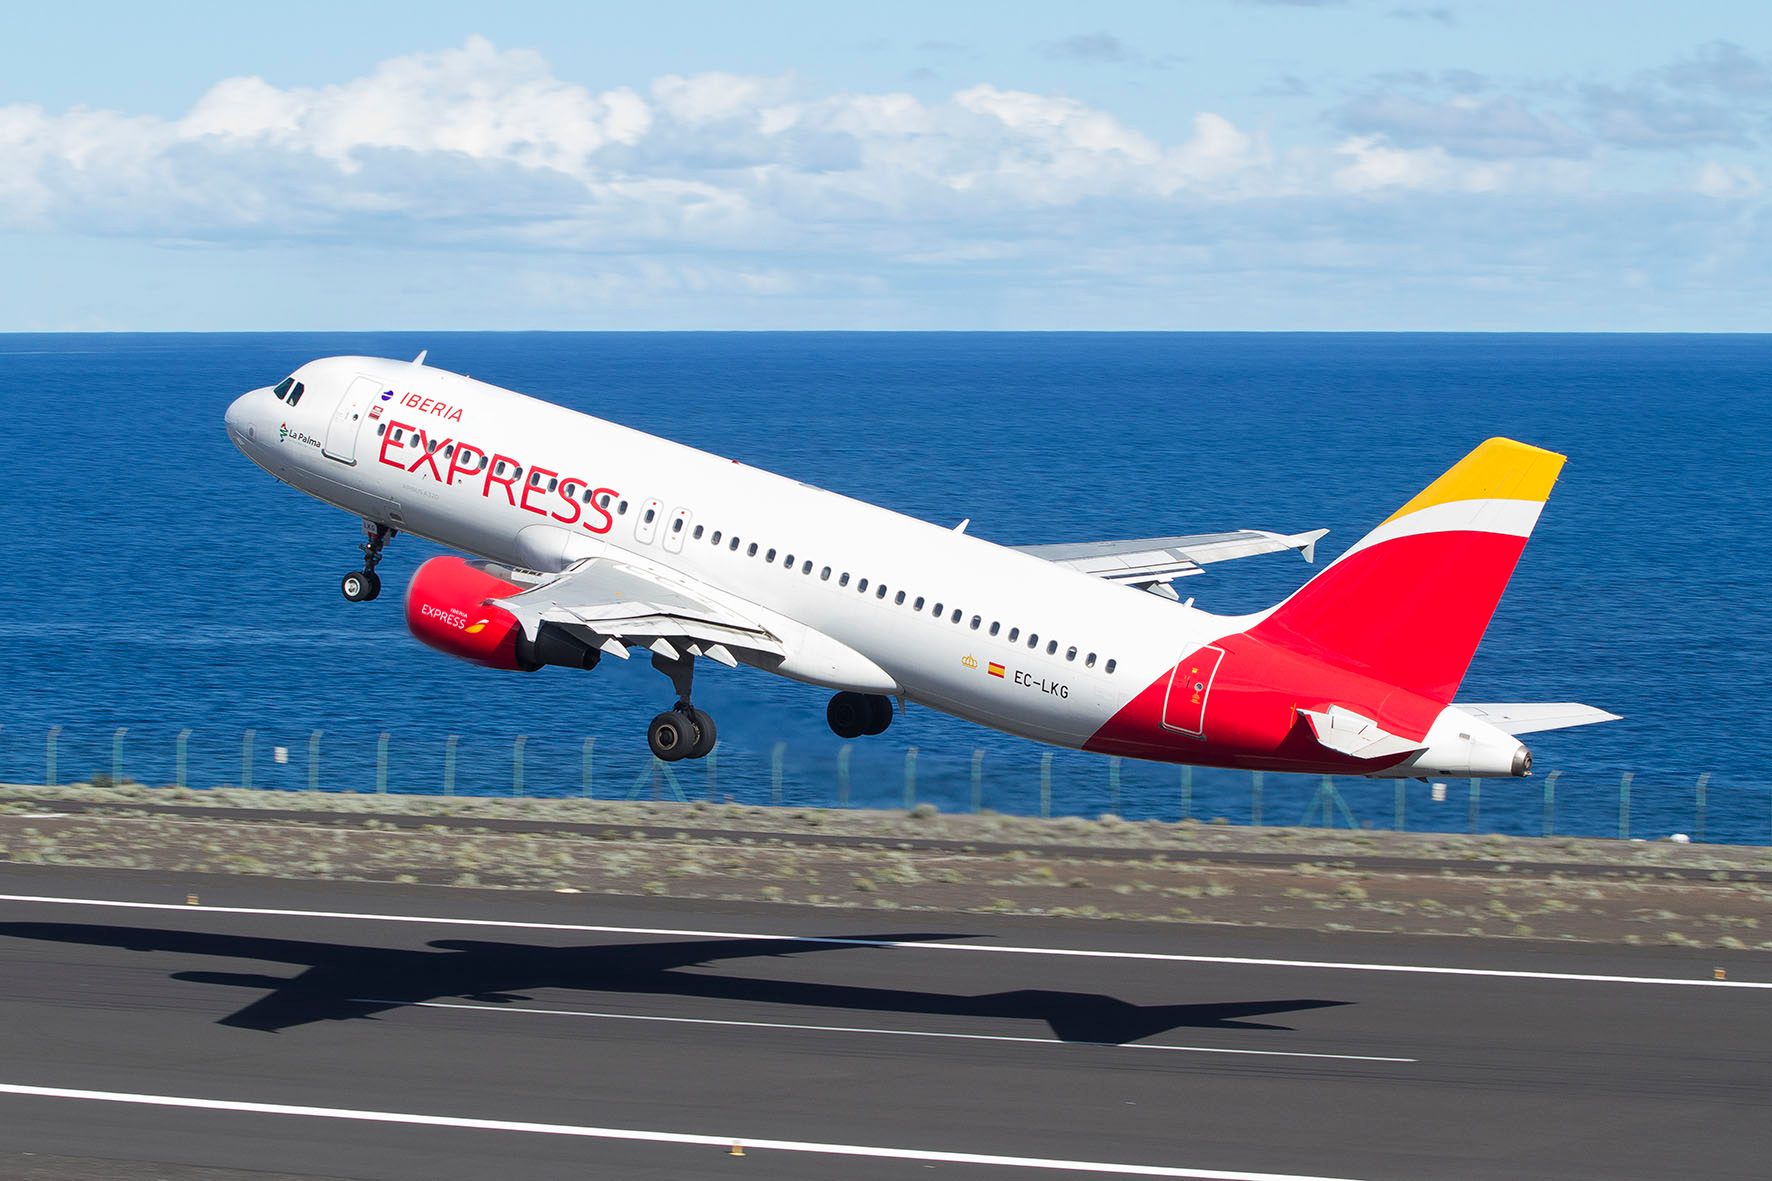 An Iberia Express aircraft taking off from runway